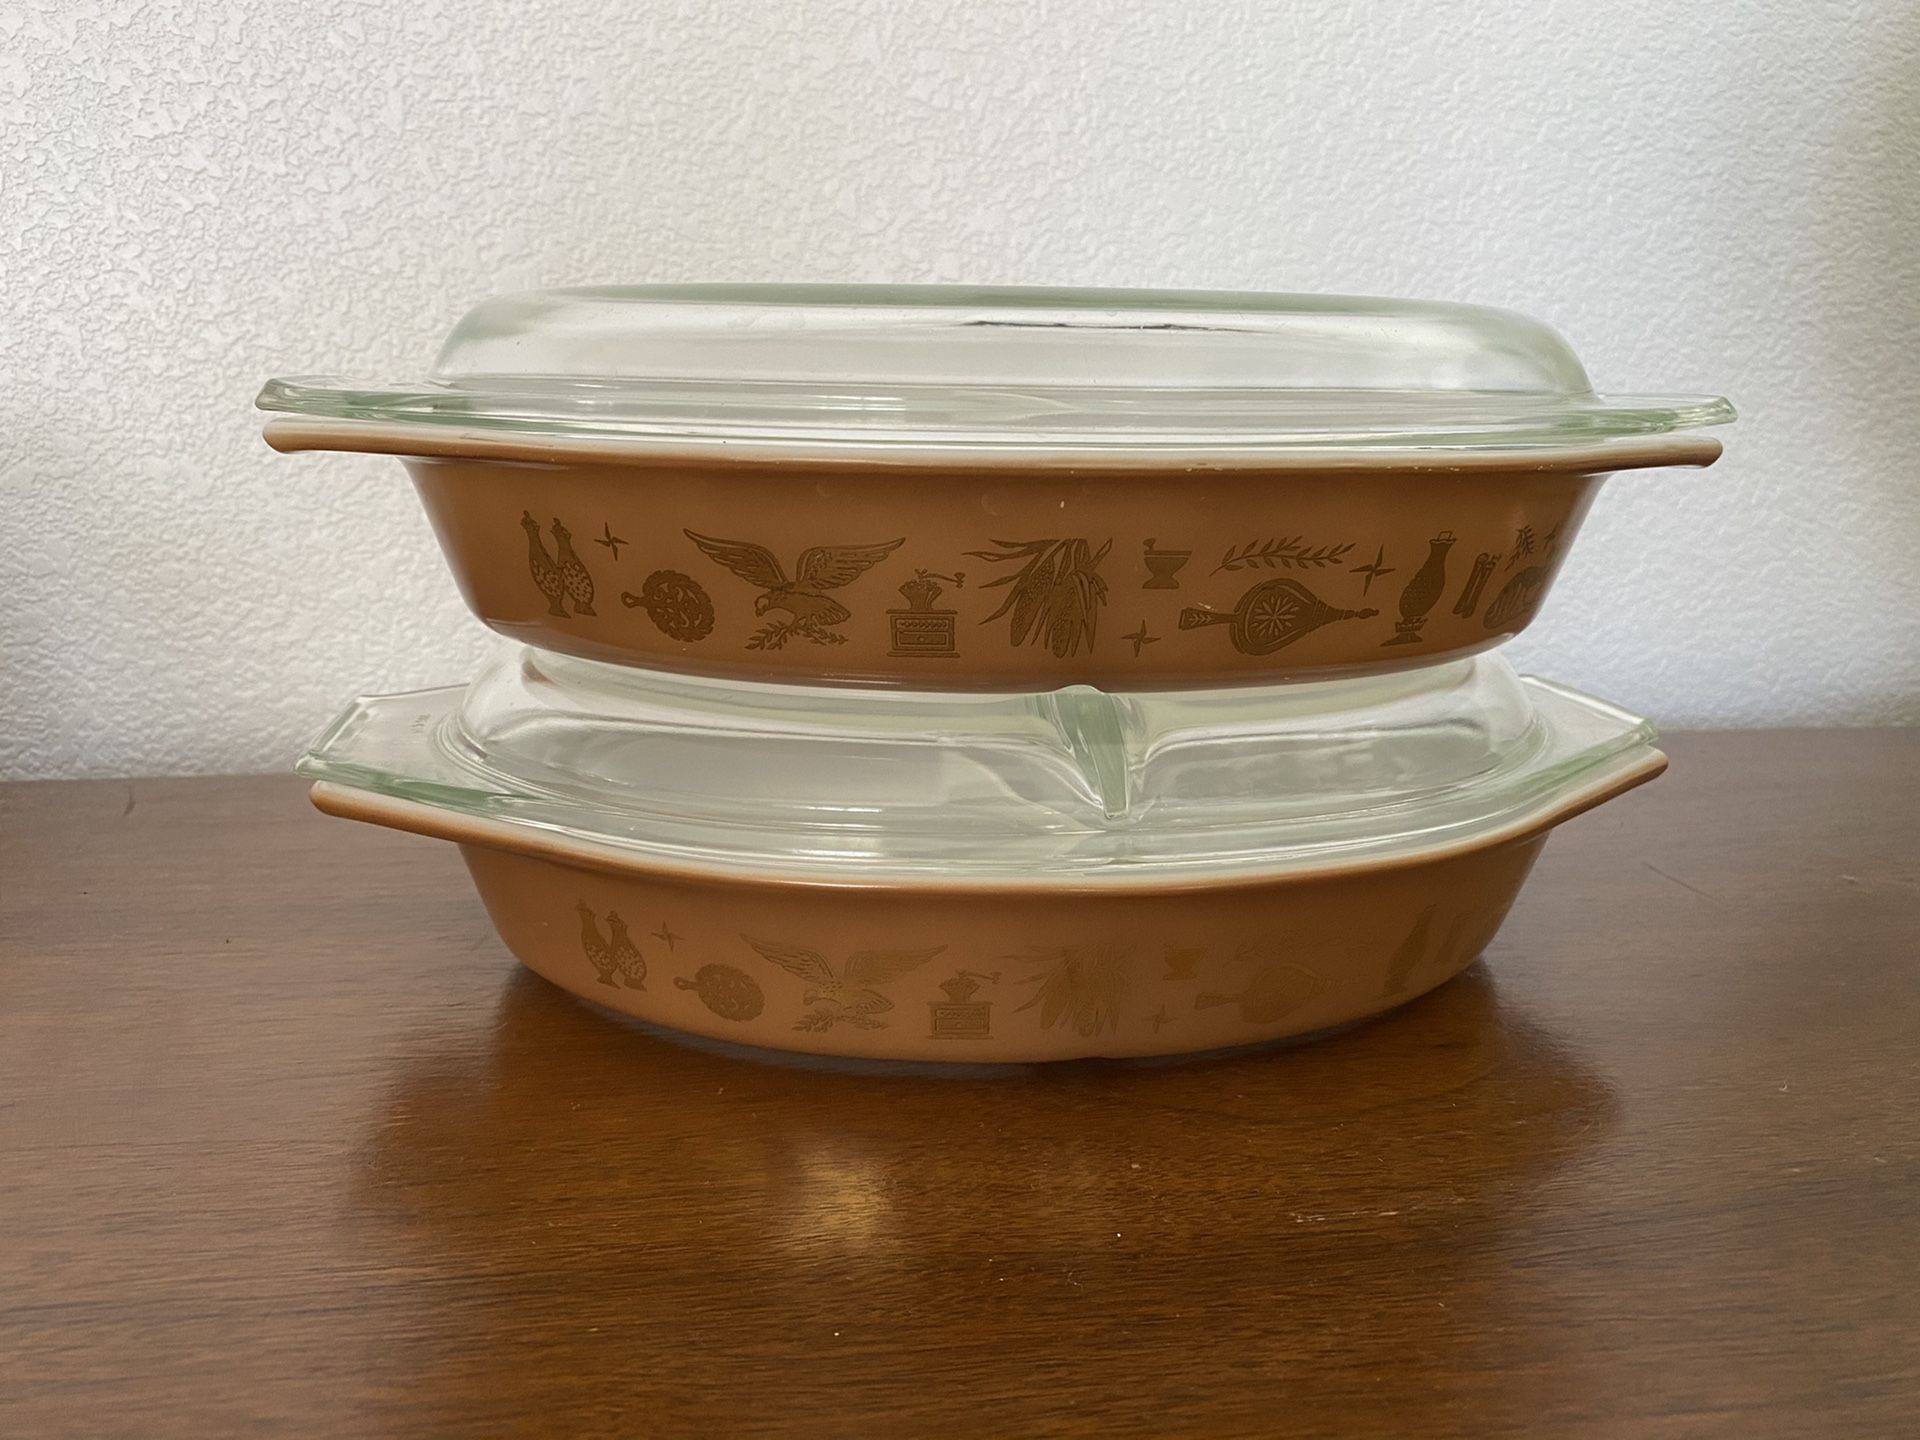 Pyrex Oval Divided Covered Casserole Bake Ware Dish Early American Pattern Promotional Brown Gold